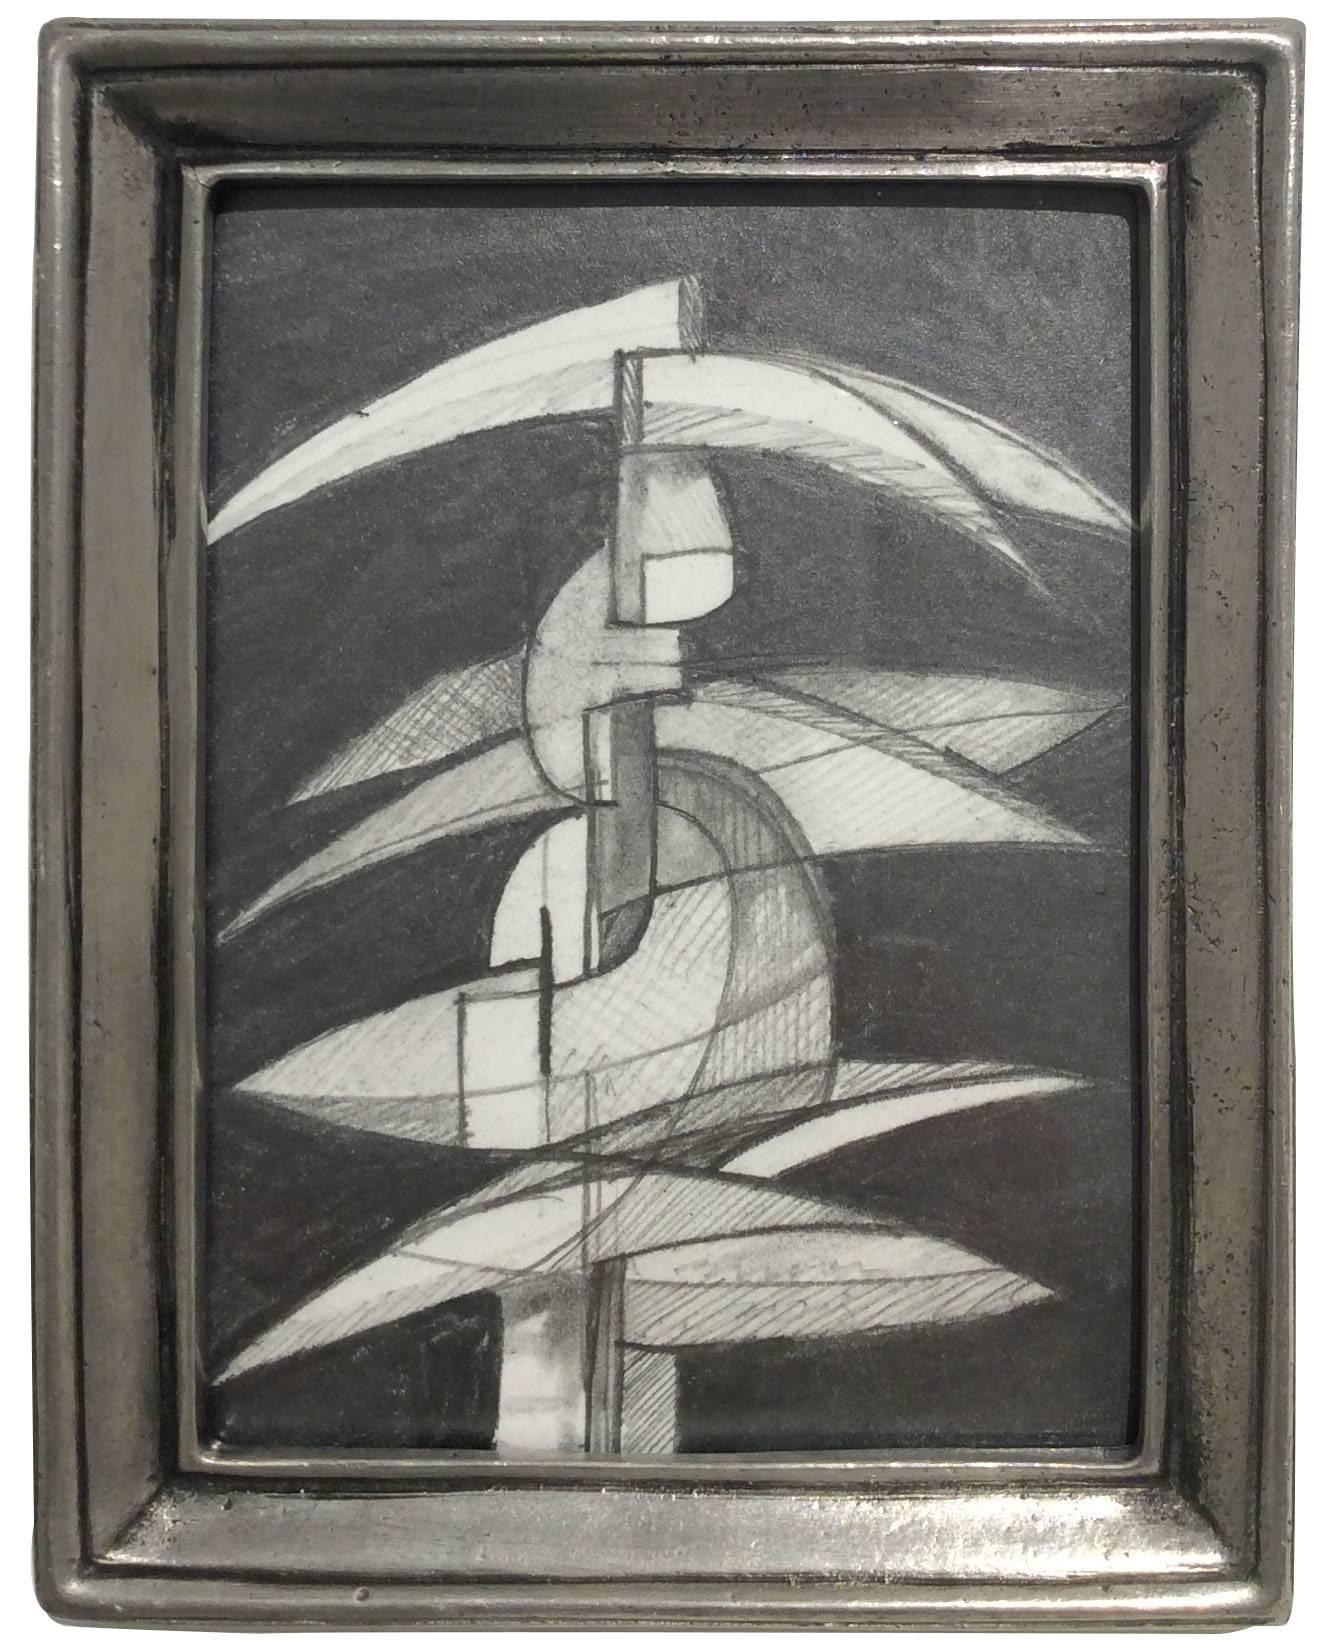 Infanta XLVIII (Abstract Figurative Graphite Drawing in Antique Pewter Frame)